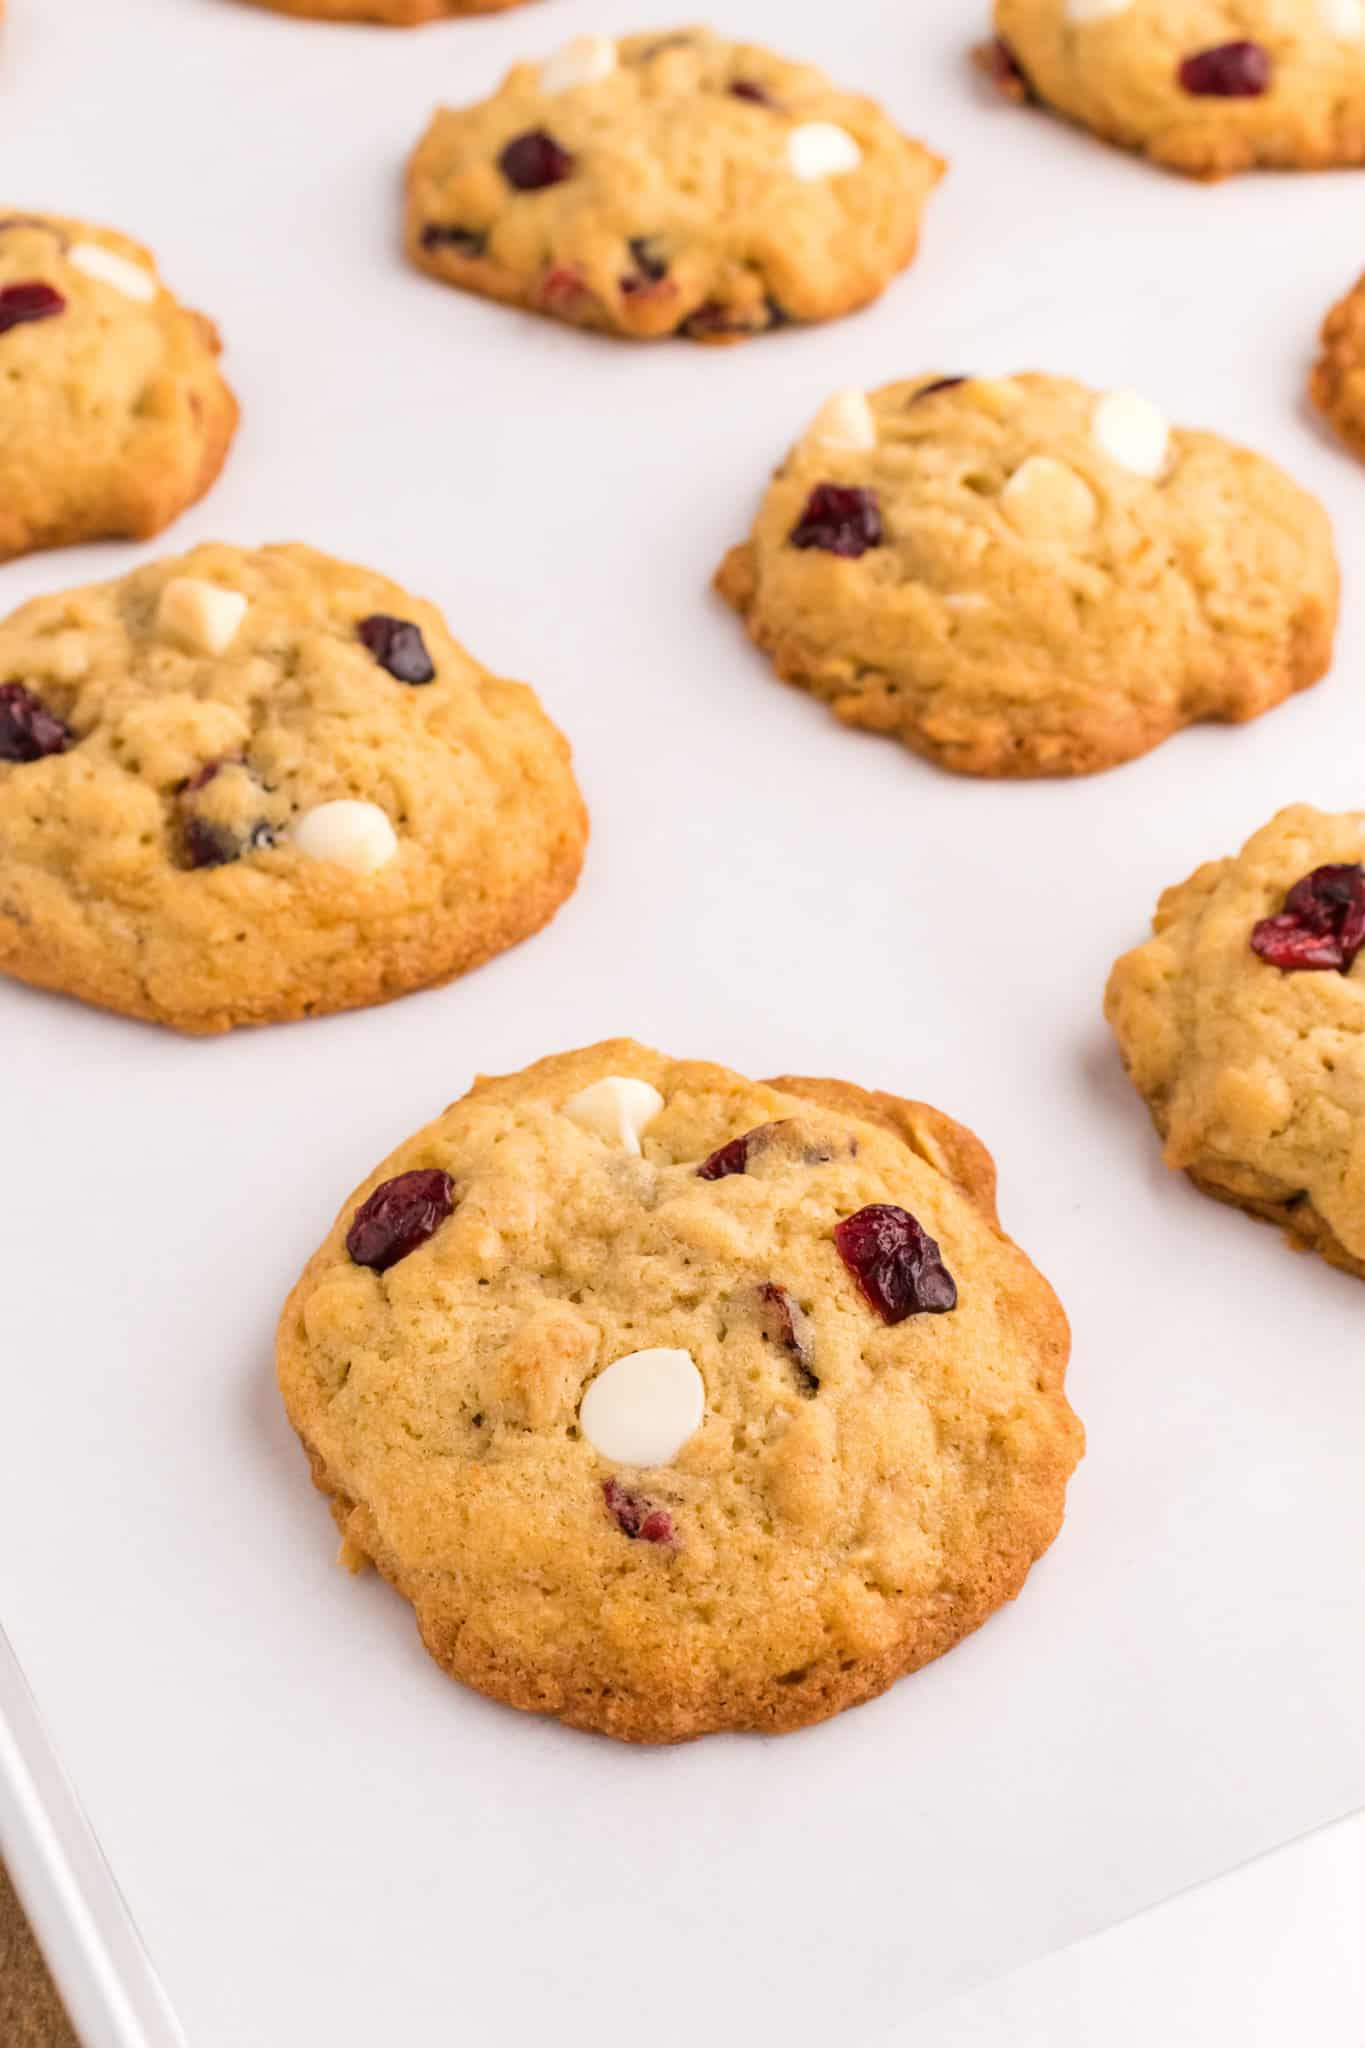 White Chocolate Cranberry Oatmeal Cookies are delicious chewy oatmeal cookies loaded with white chocolate chips and dried cranberries.